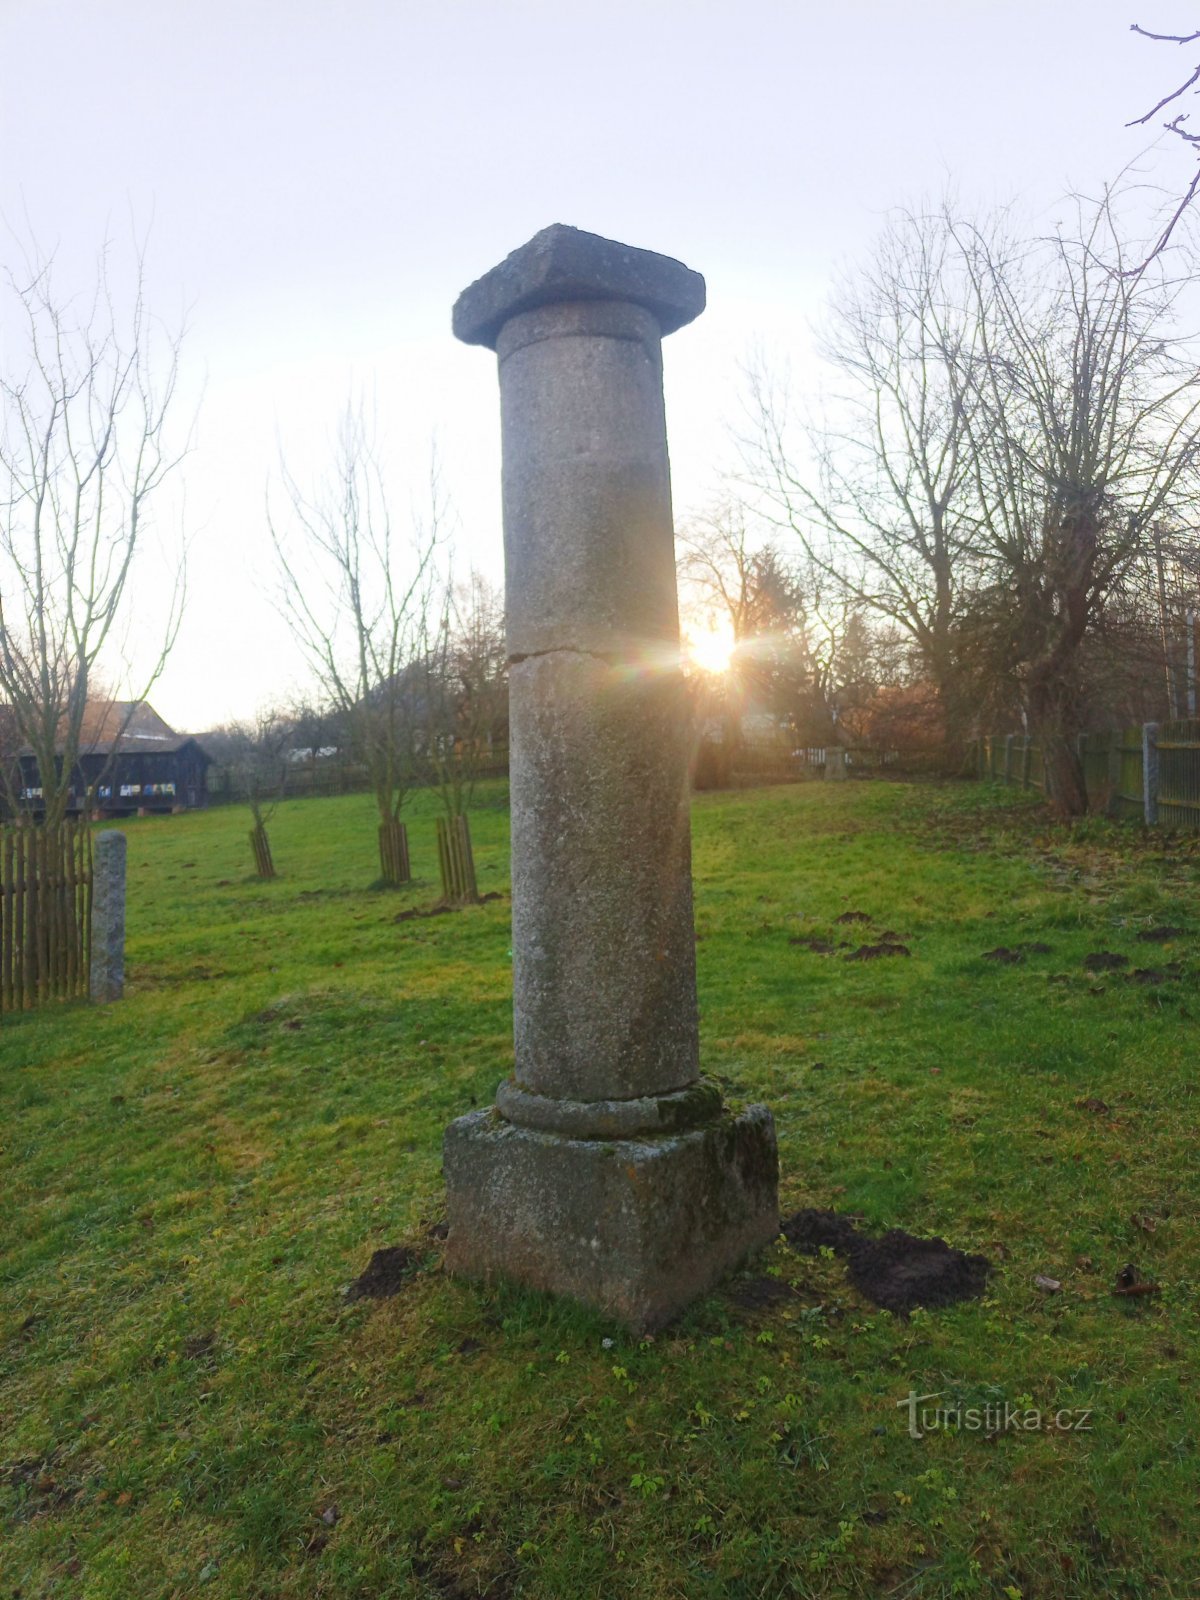 1. Stone milestone at the entrance to the area